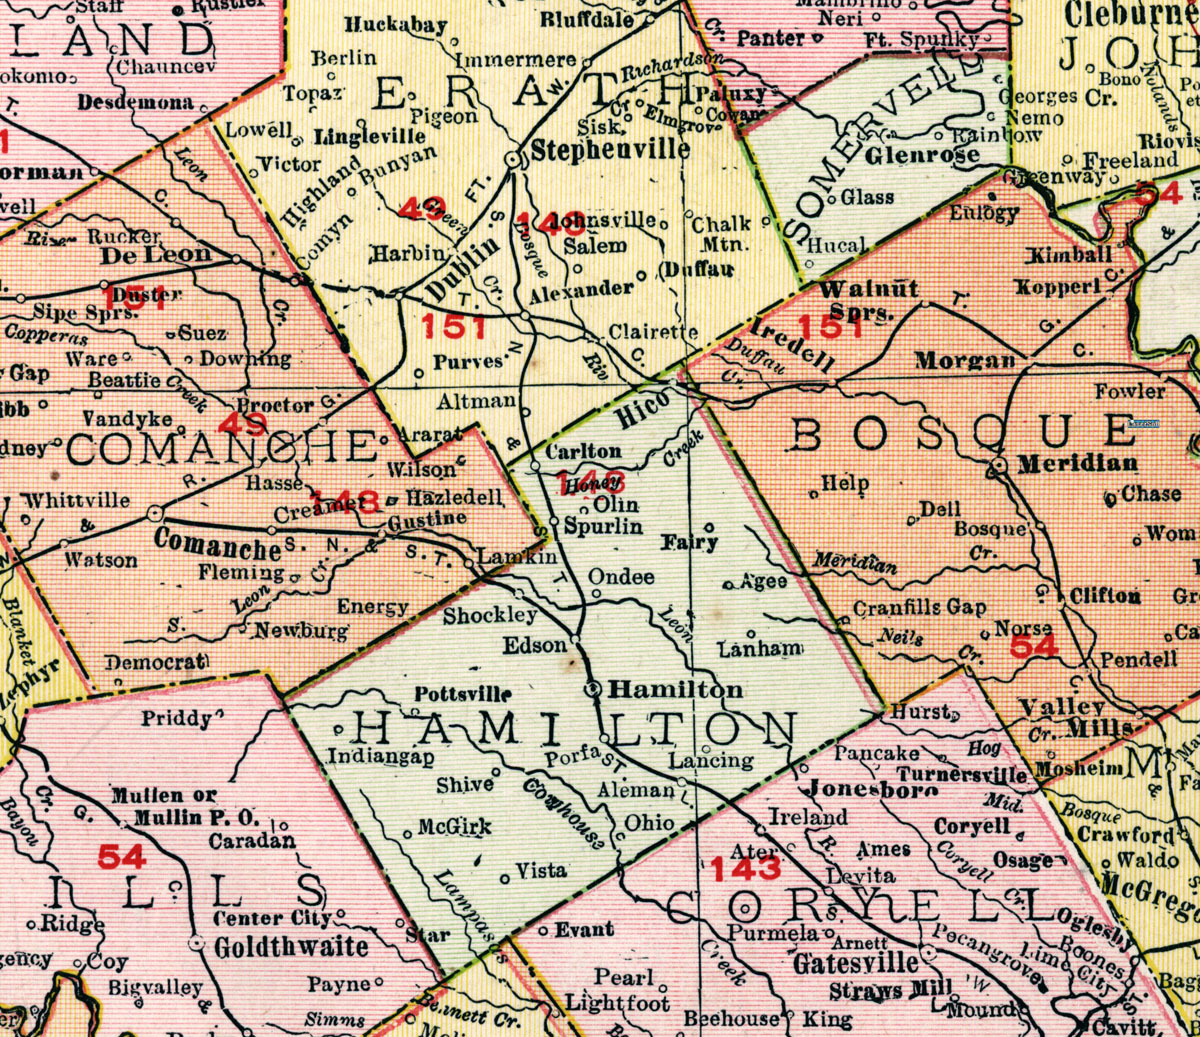 Stephenville North & South Texas Railway Company (Tex.), map showing route in 1913.